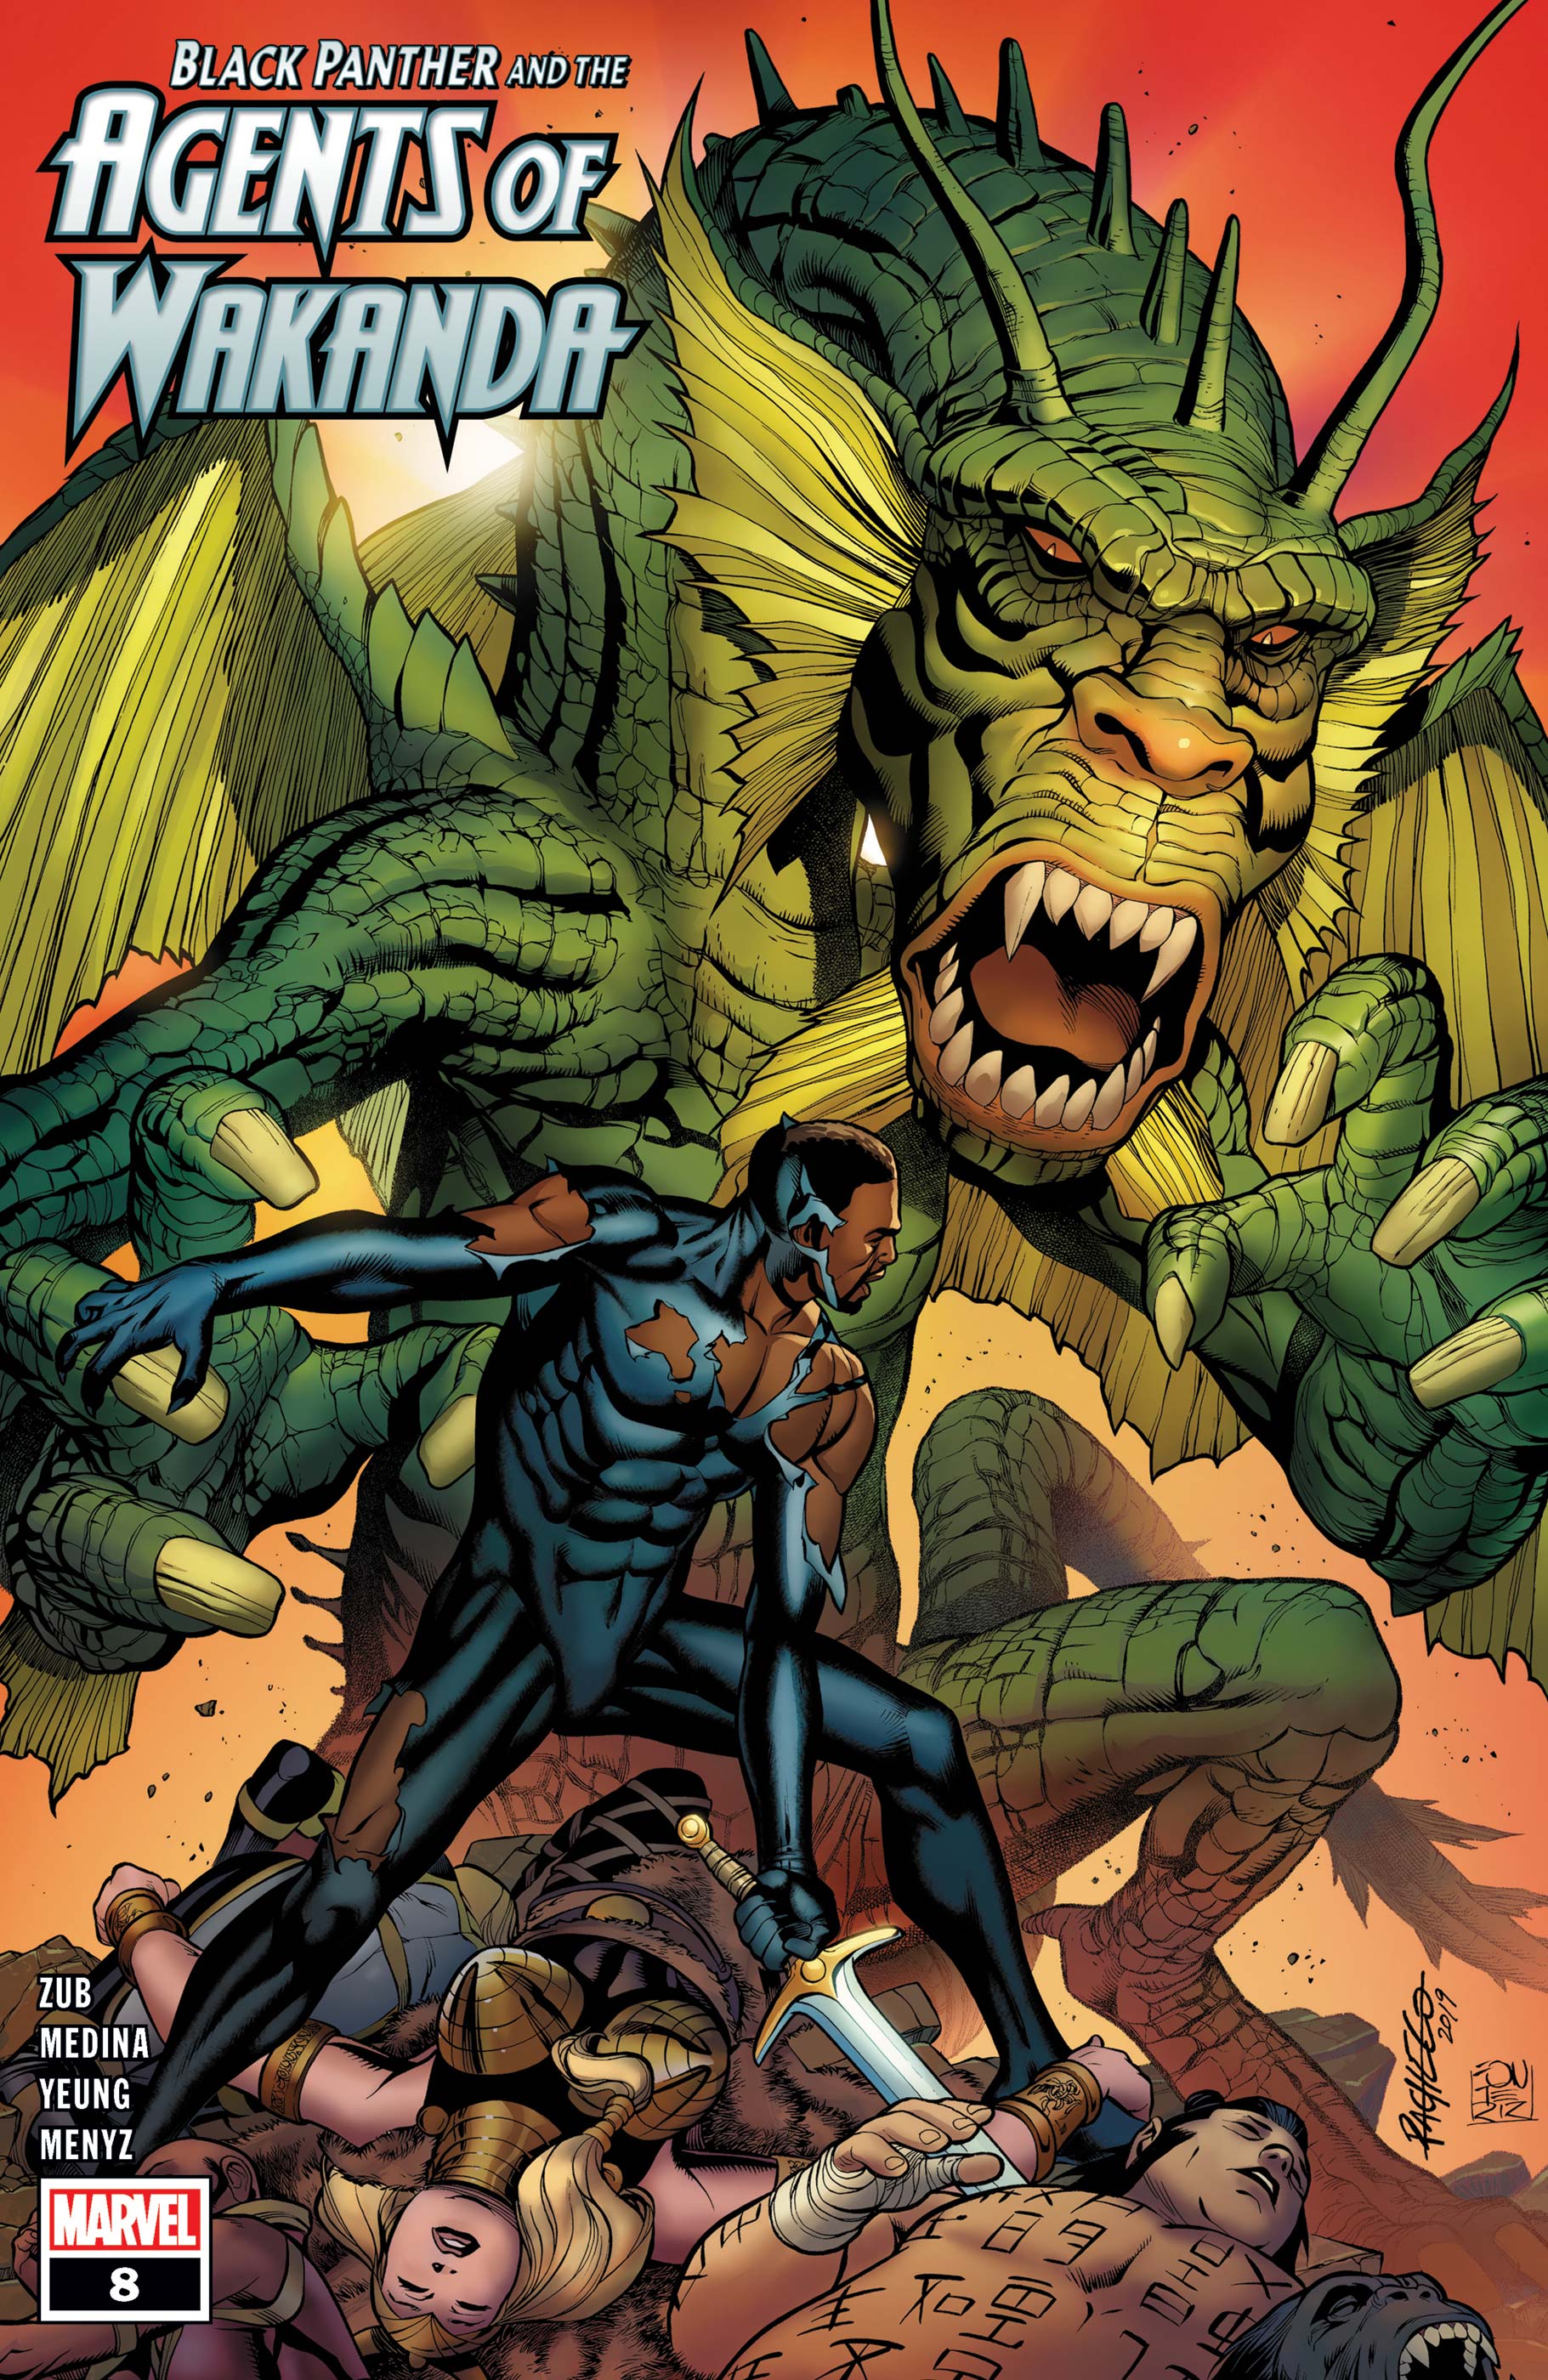 Black Panther and the Agents of Wakanda (2019) #8